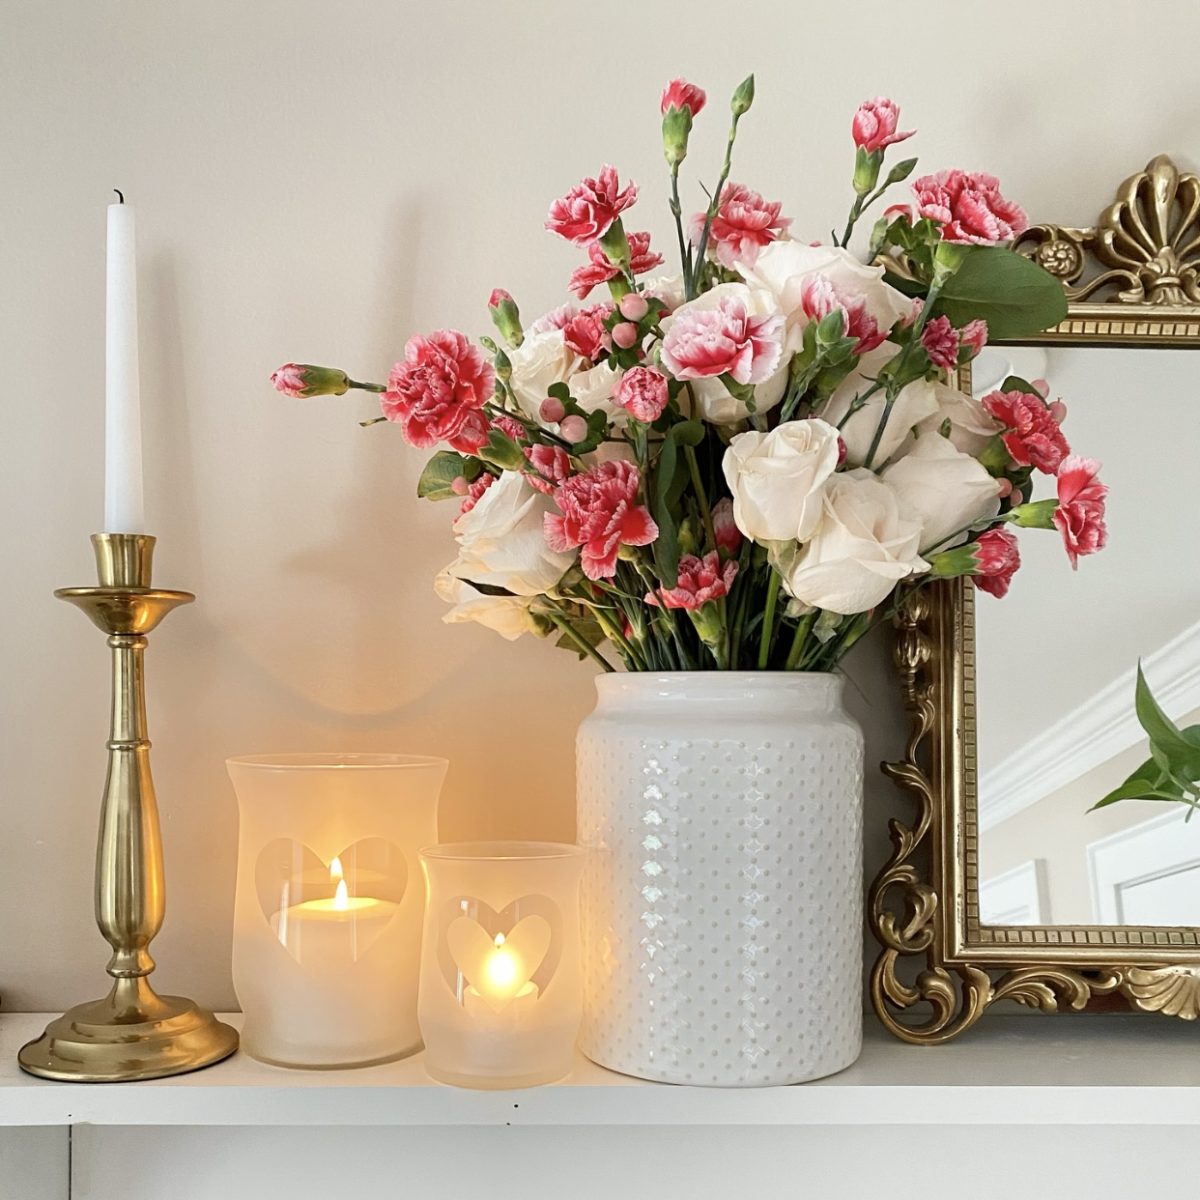 Frosted Glass Valentine's Day candle holders on a shelf styled with a candlestick, a Valentine's Day floral arrangement, and a vintage mirror.